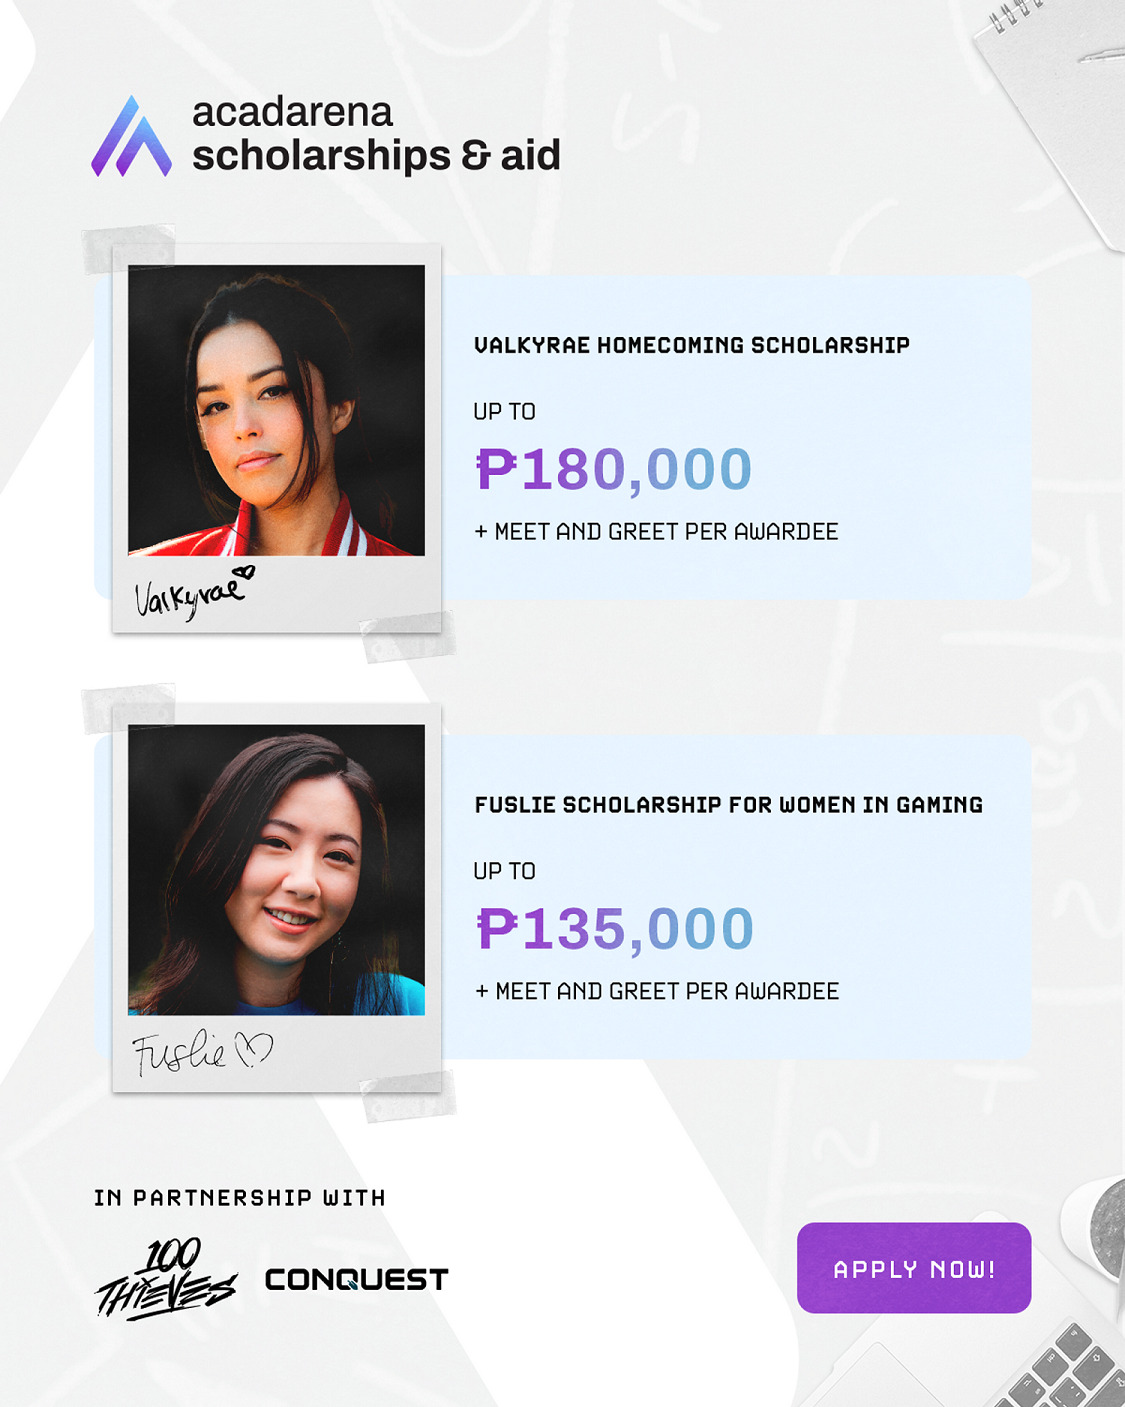 AcadArena Partners with 100 Thieves to Provide Scholarships to Filipino Students -